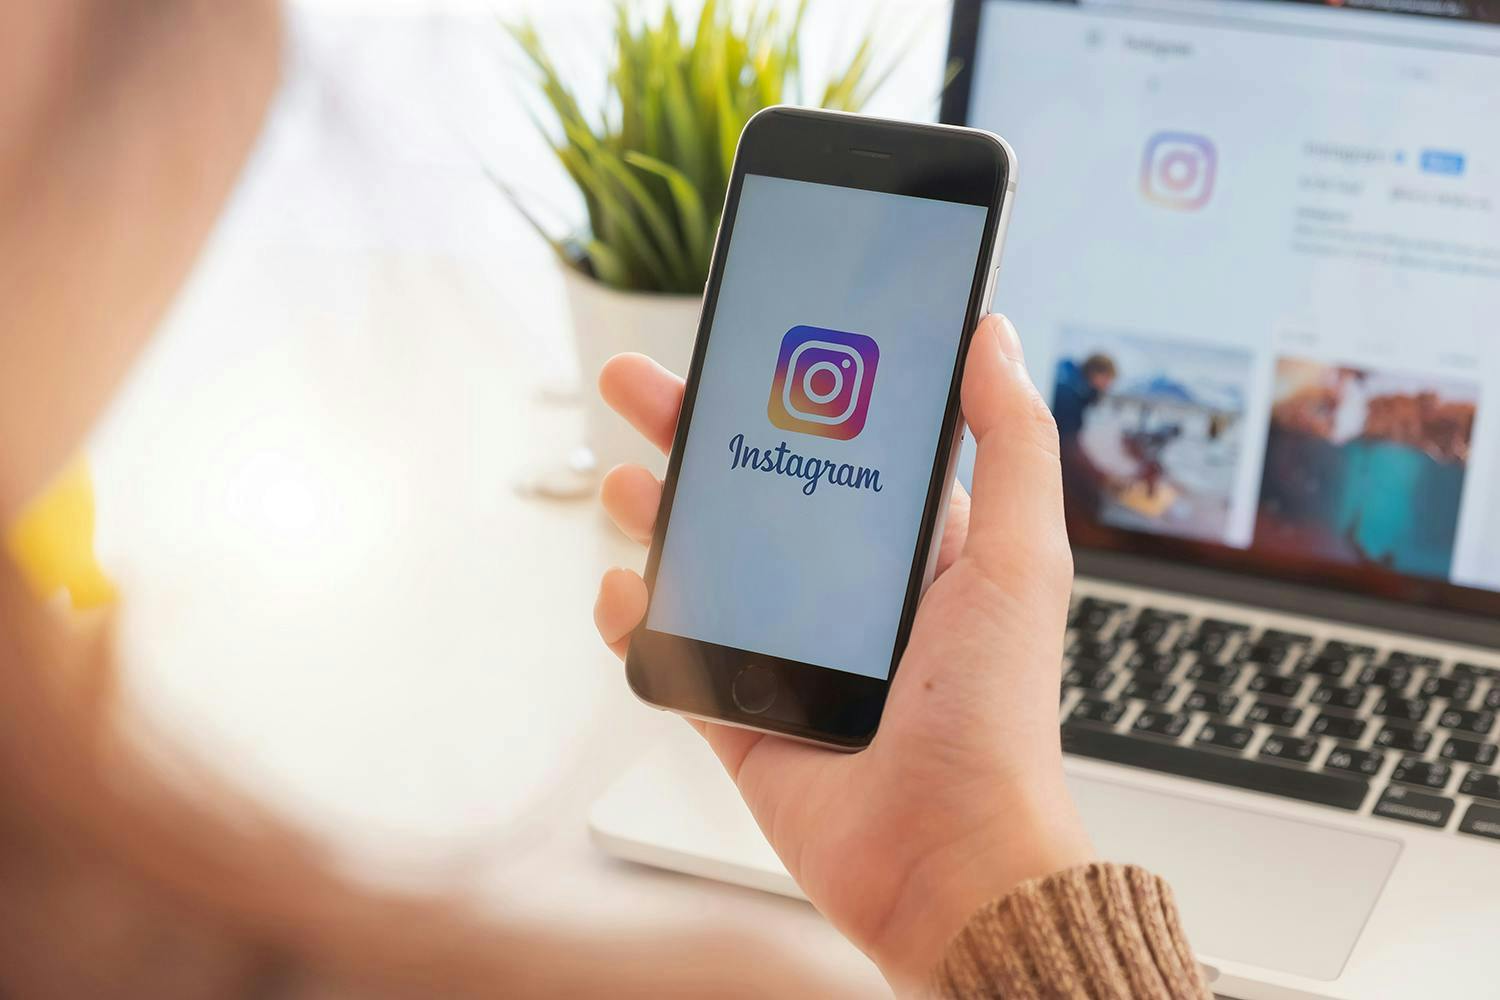 Image of the hand holding the smartphone with the Instagram logo displayed